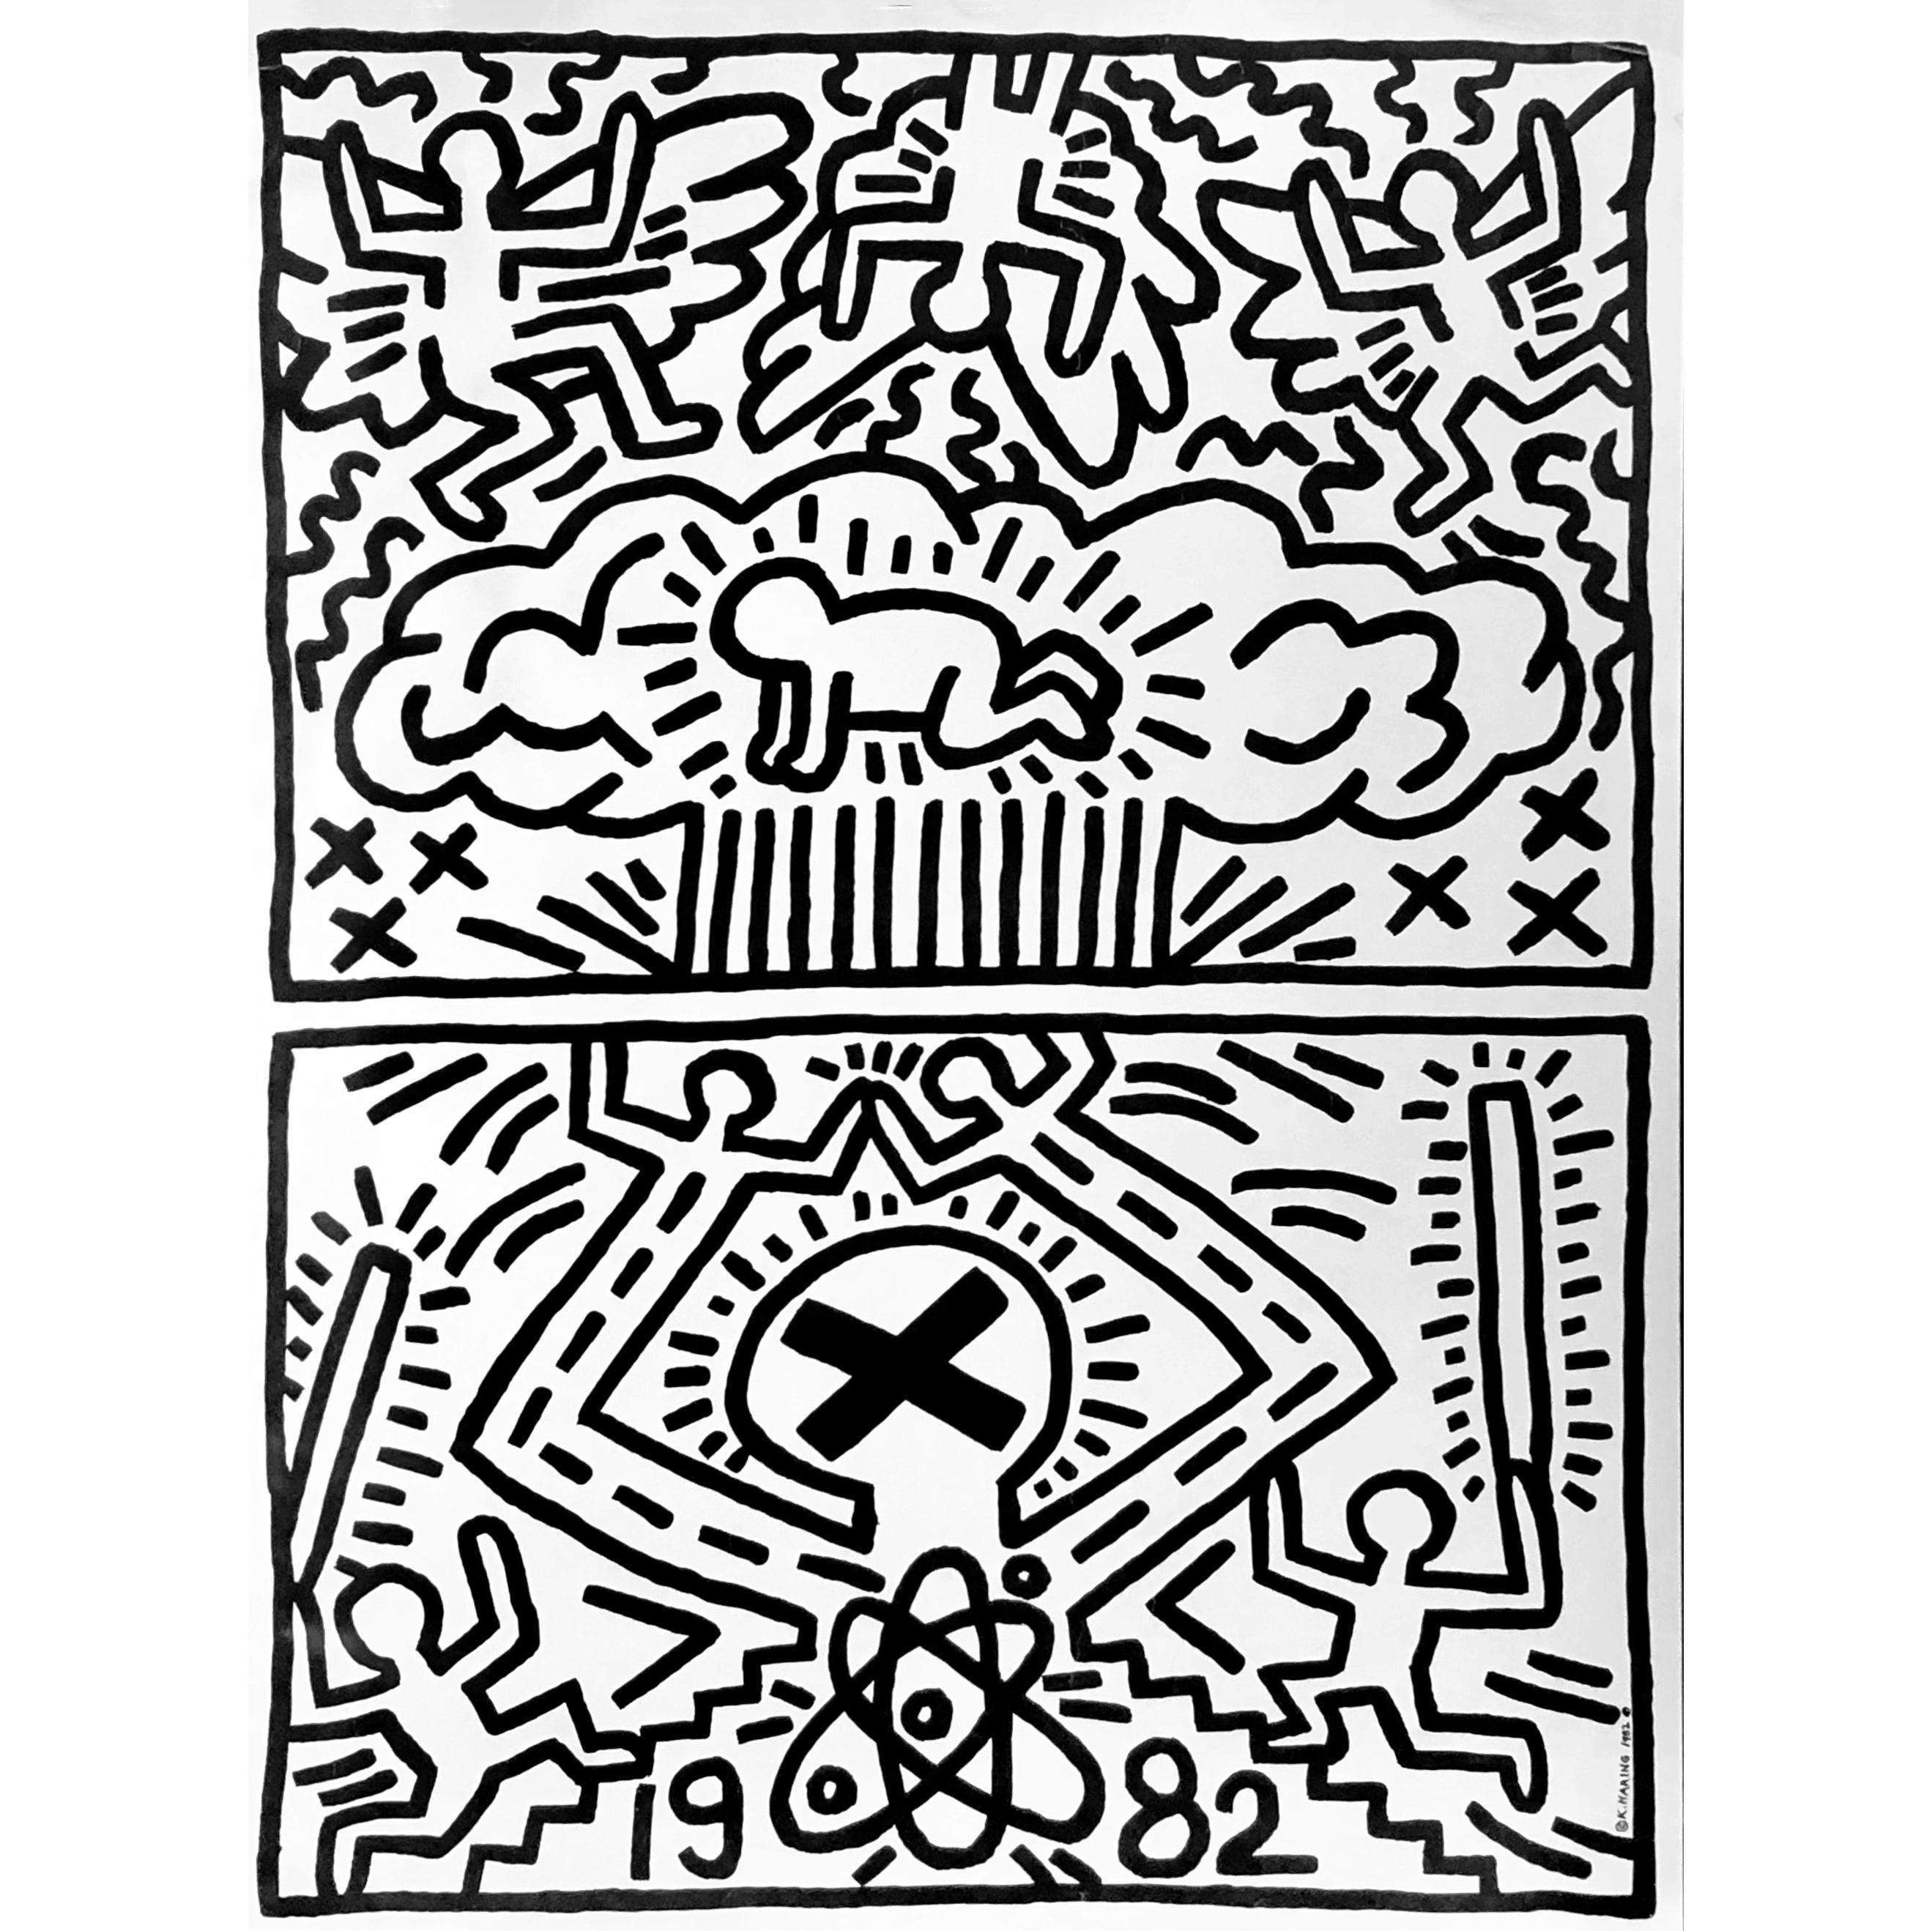 Keith Haring Nuclear Disarmament Poster 1982
In 1982, Haring created the Poster for Nuclear Disarmament, which features his signature Radiant Baby in a mushroom cloud. “Babies represent the possibility of the future,” Haring said, “the understanding